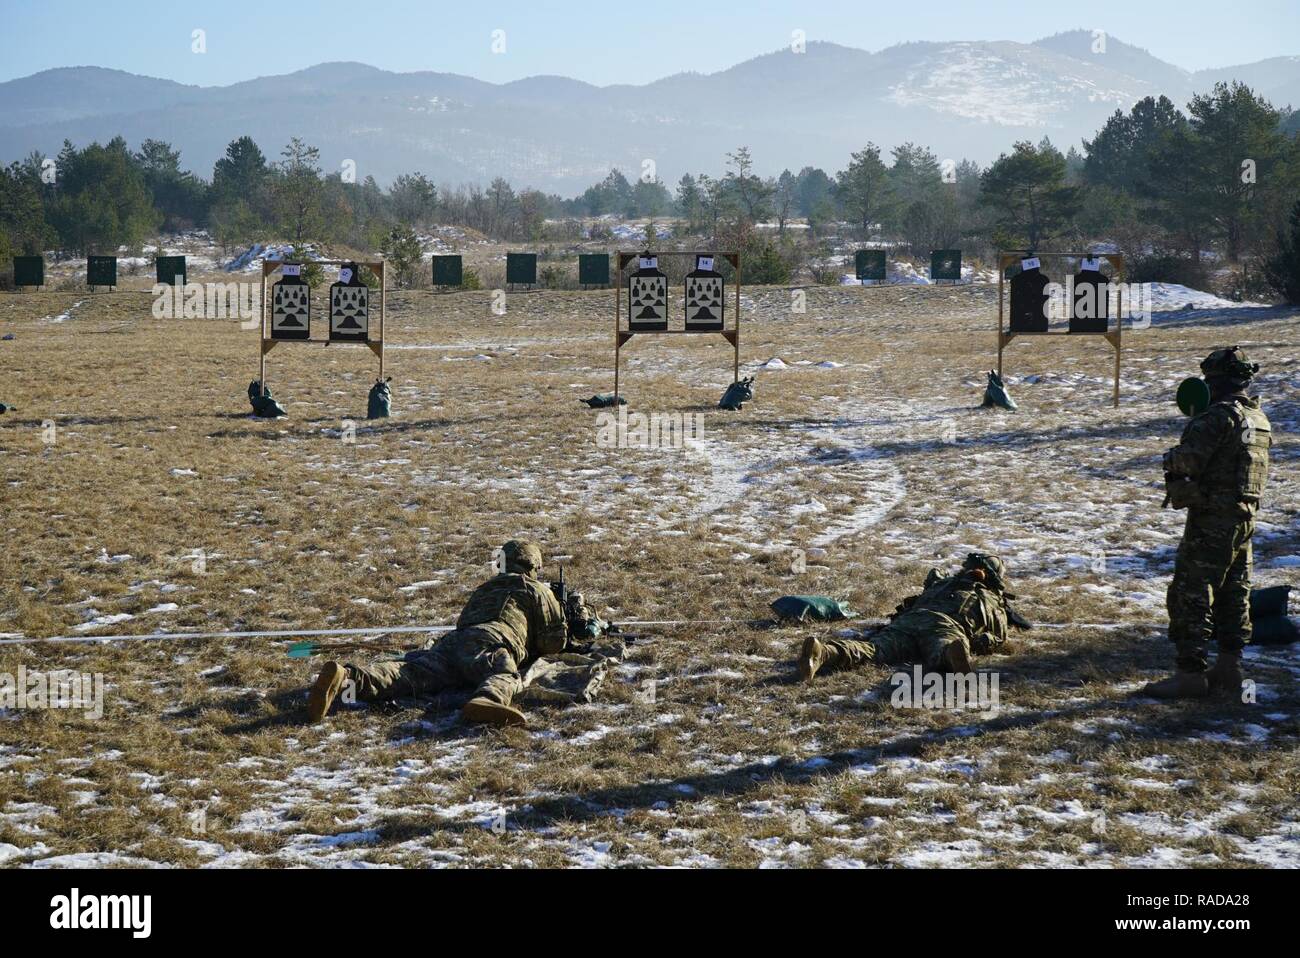 U.S. Army paratroopers from the 173rd Brigade Support Battalion, 173rd Airborne Brigade conduct M4 carbine weapons qualification during exercise Lipizzaner III in Bac, Slovenia, on Jan. 24, 2017. Lipizzaner is a combined squad-level training exercise in preparation for platoon evaluation, and to validate battalion-level deployment procedures. Stock Photo